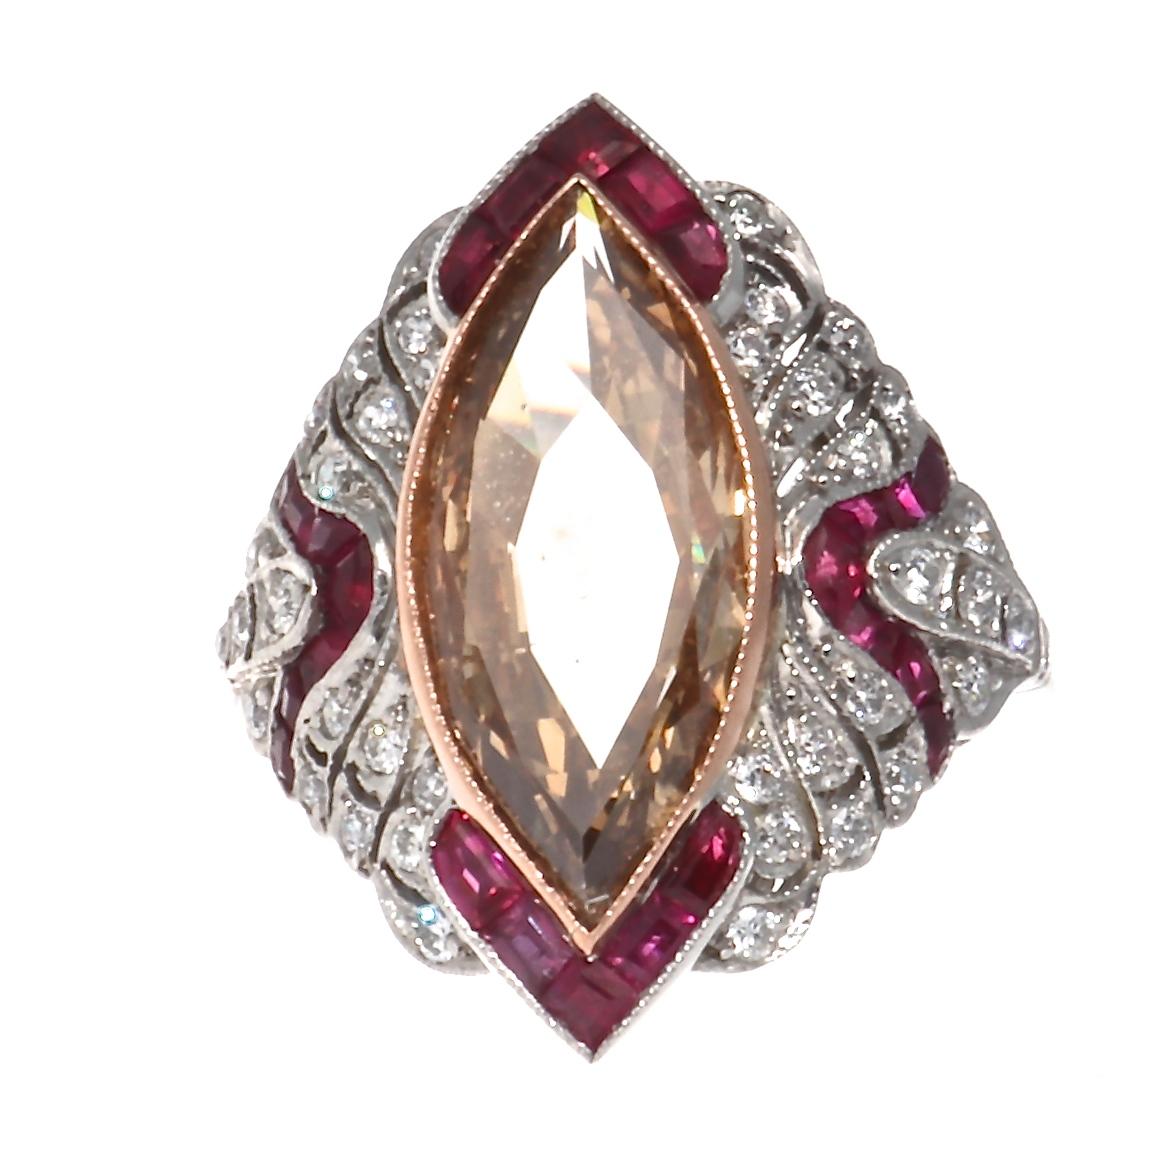 Featuring a 3.84-carat natural orangish-brown fancy color diamond that is perfectly accented by perfectly calibrated vivid red rubies and numerous near colorless diamonds. Excellently placed in the magnificently hand crafted platinum ring. Ring size